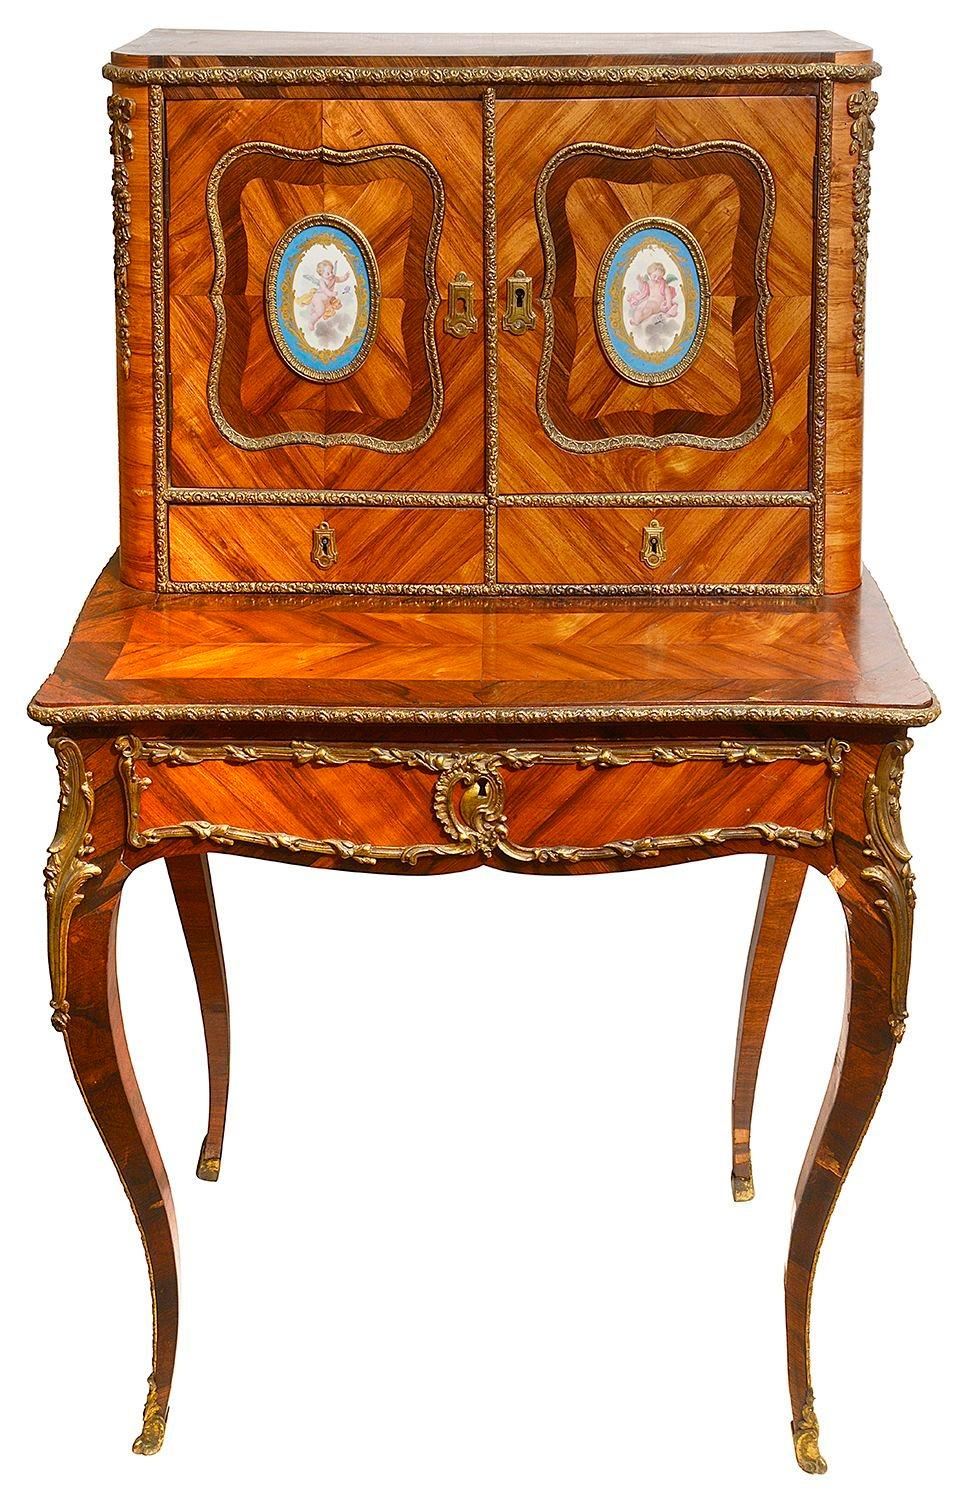 A French kingwood quarter veneered and ormolu-mounted bonheur du jour with Sevres-style oval floral plaques inset to the cupboard doors, two drawers to the upper section and a drawer to the frieze, raised on elegant cabriole legs with sabots feet,